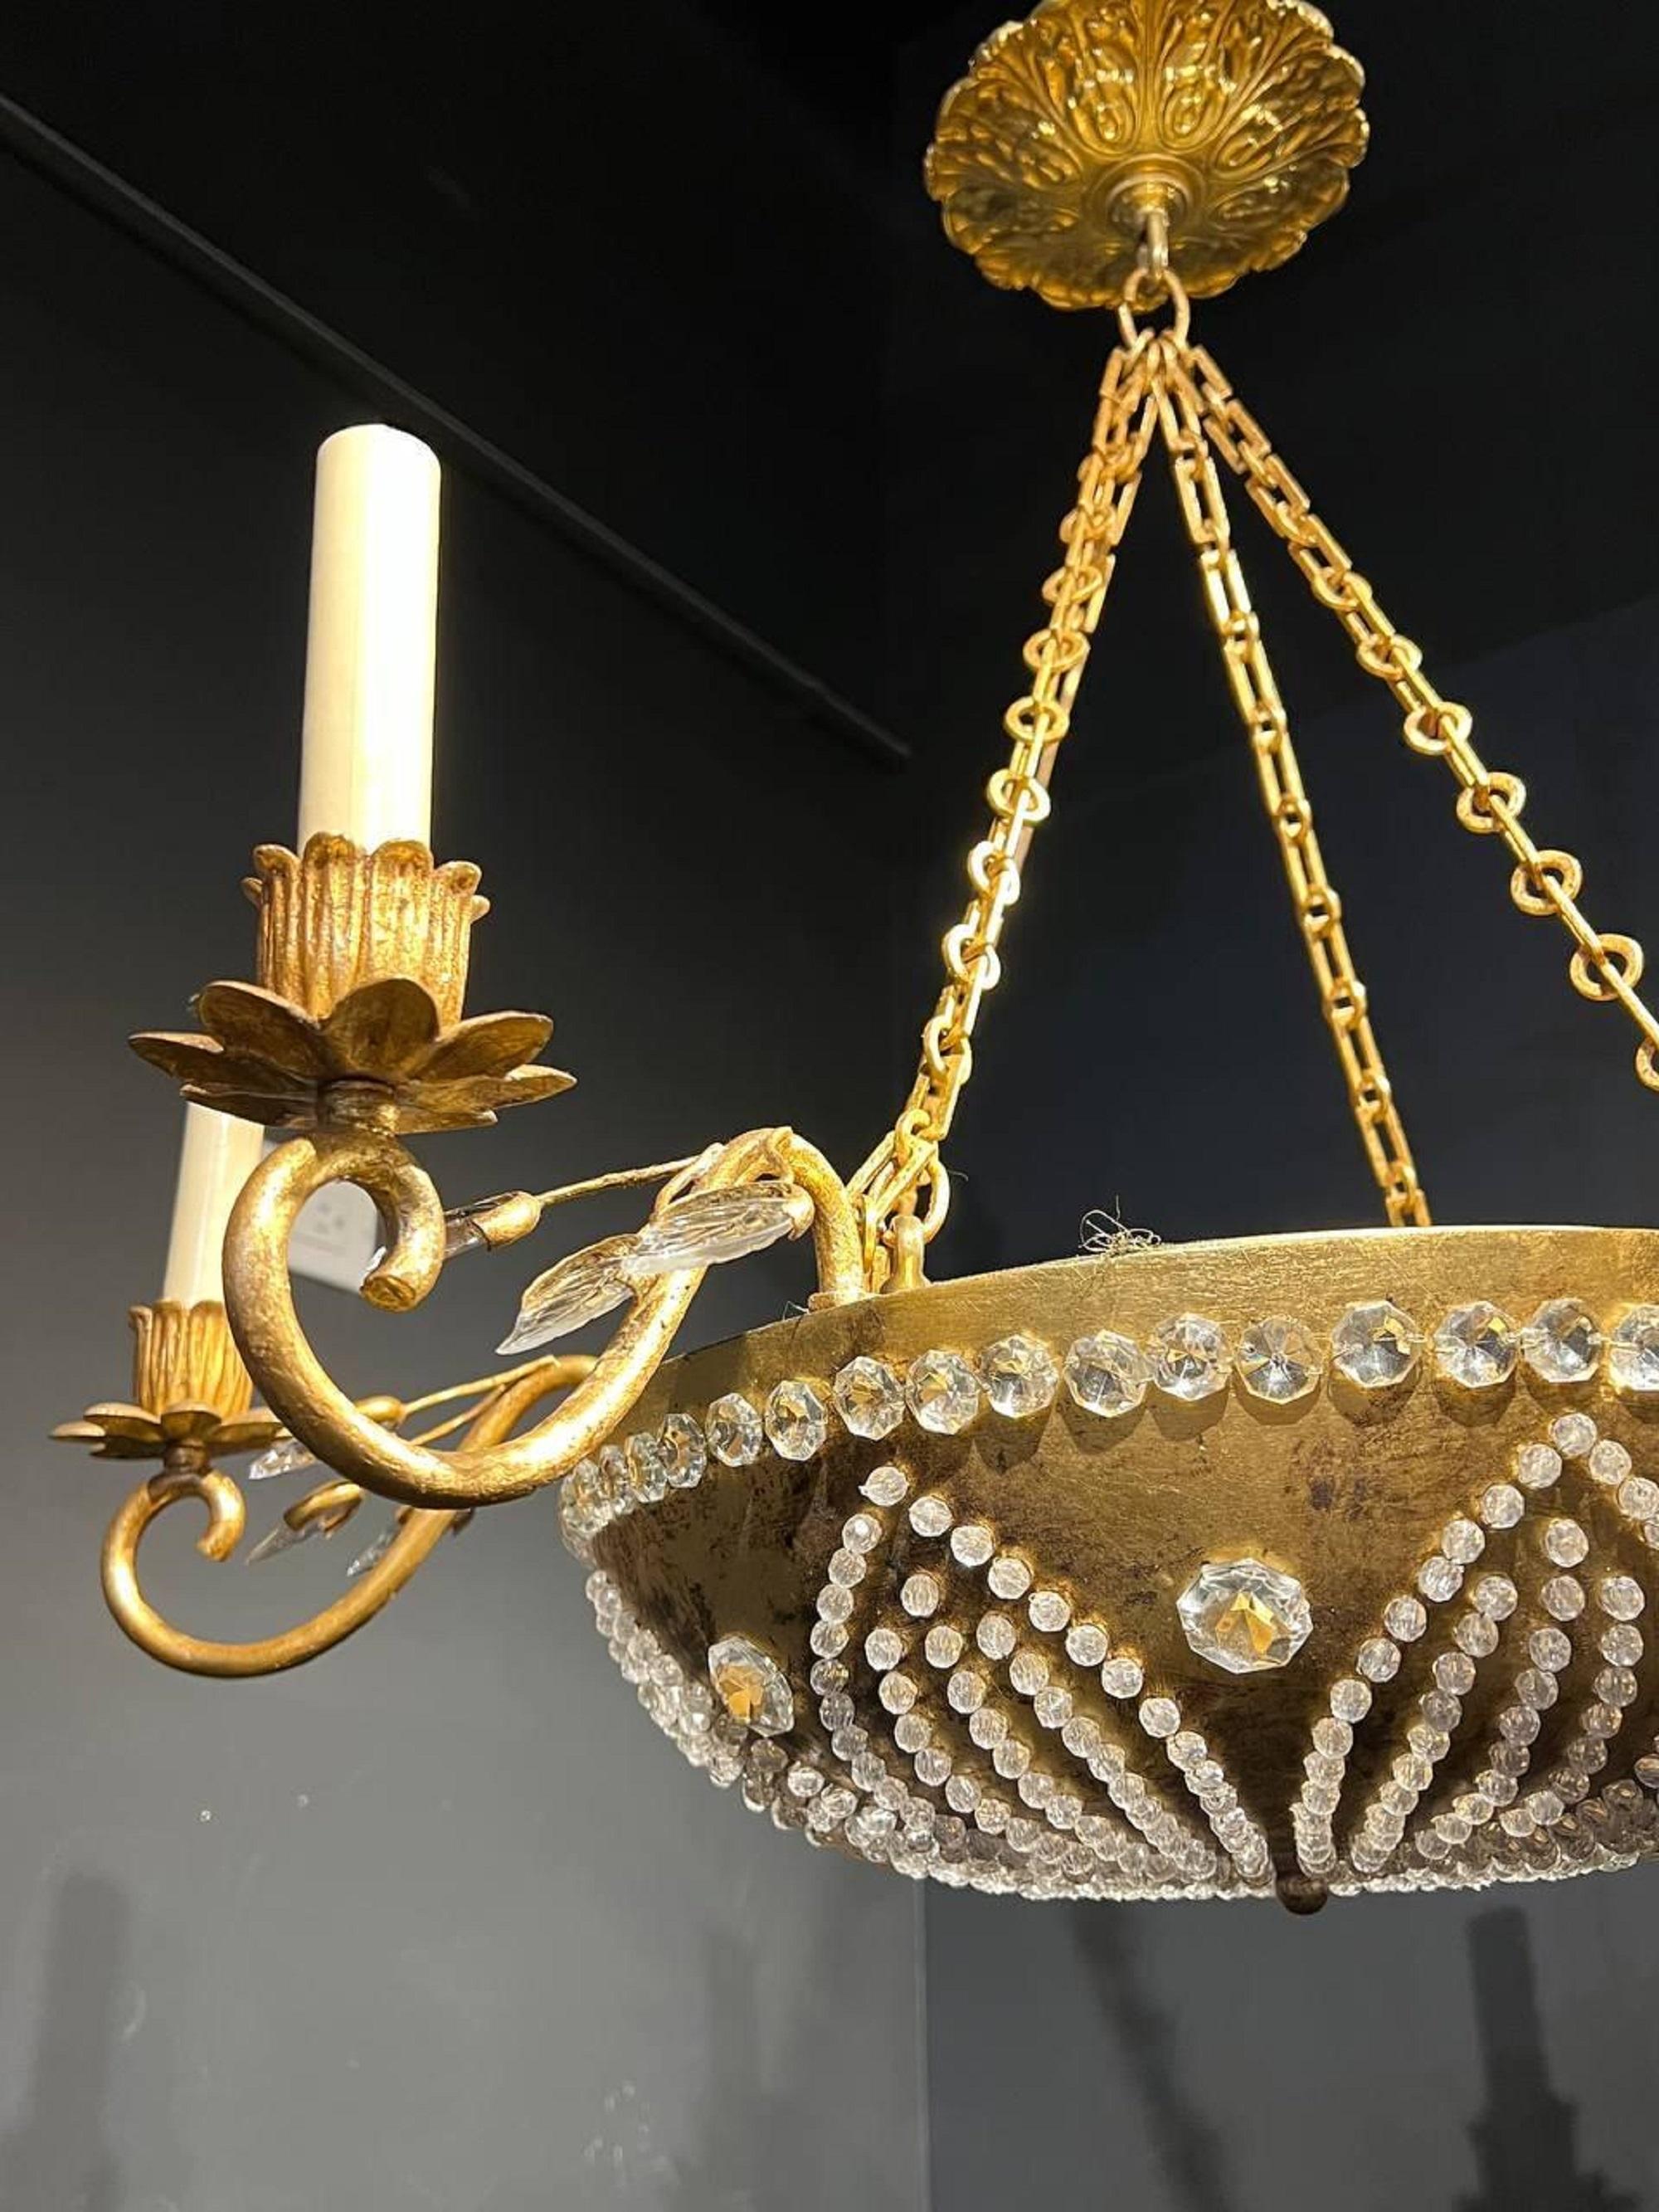 A circa 1940’s French Bagues light fixture with beaded crystals and interior light.

Dealer: G302YP